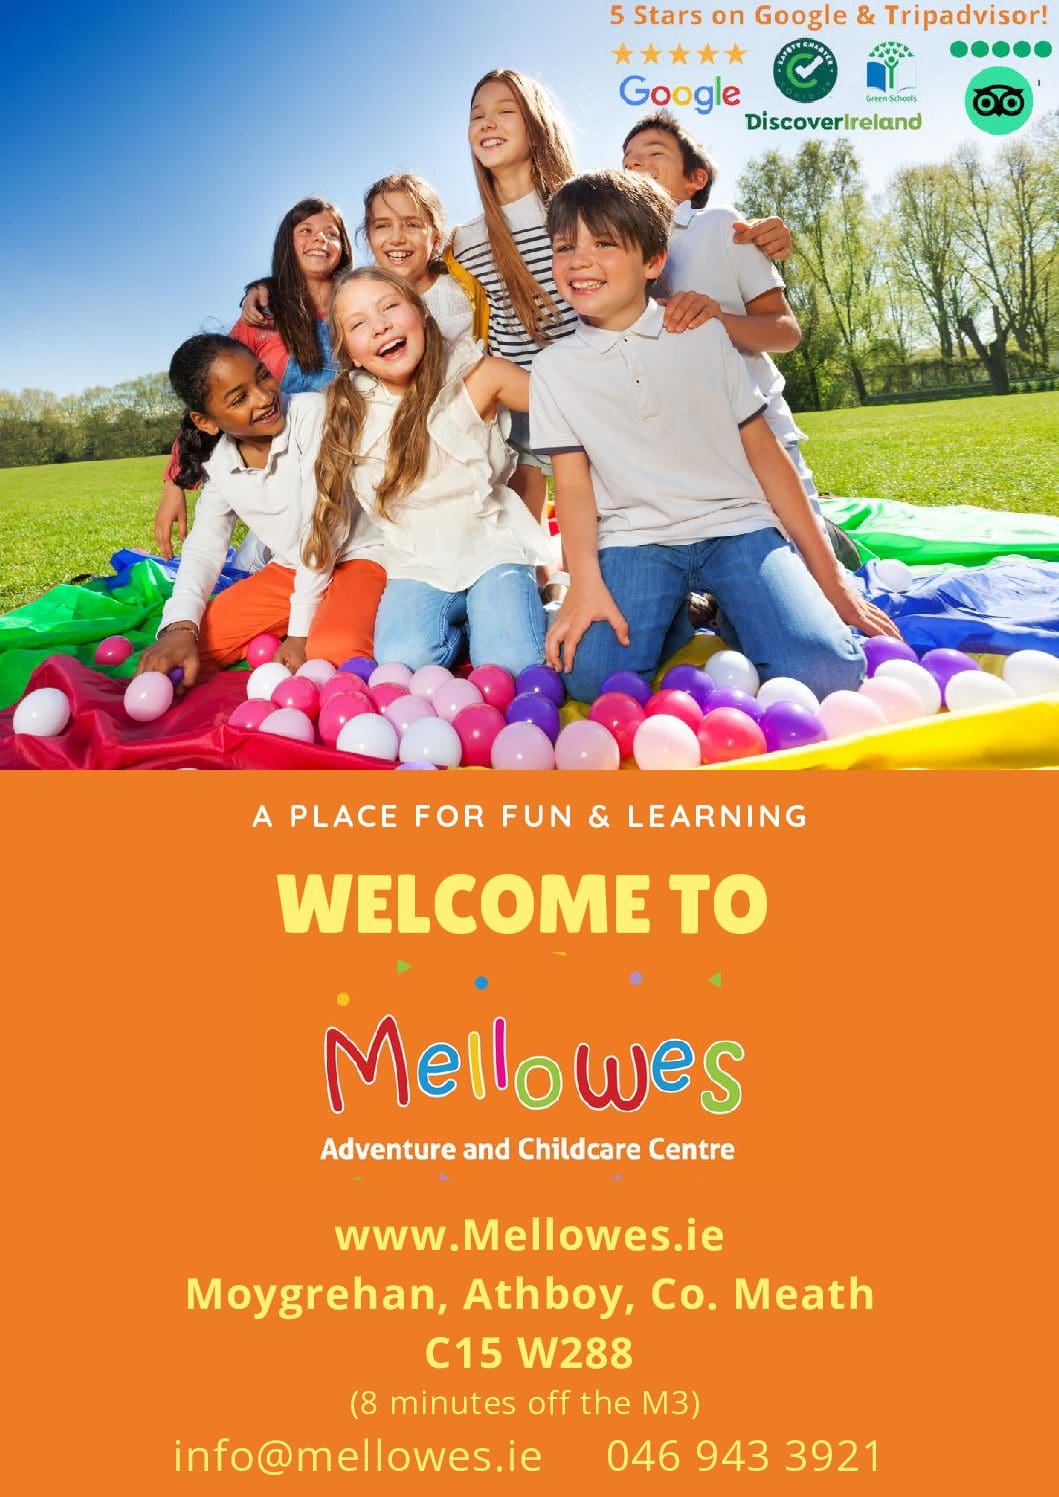 Home Mellowes | Adventure through play and learning open Wednesday to Sunday 12-5pm July/August